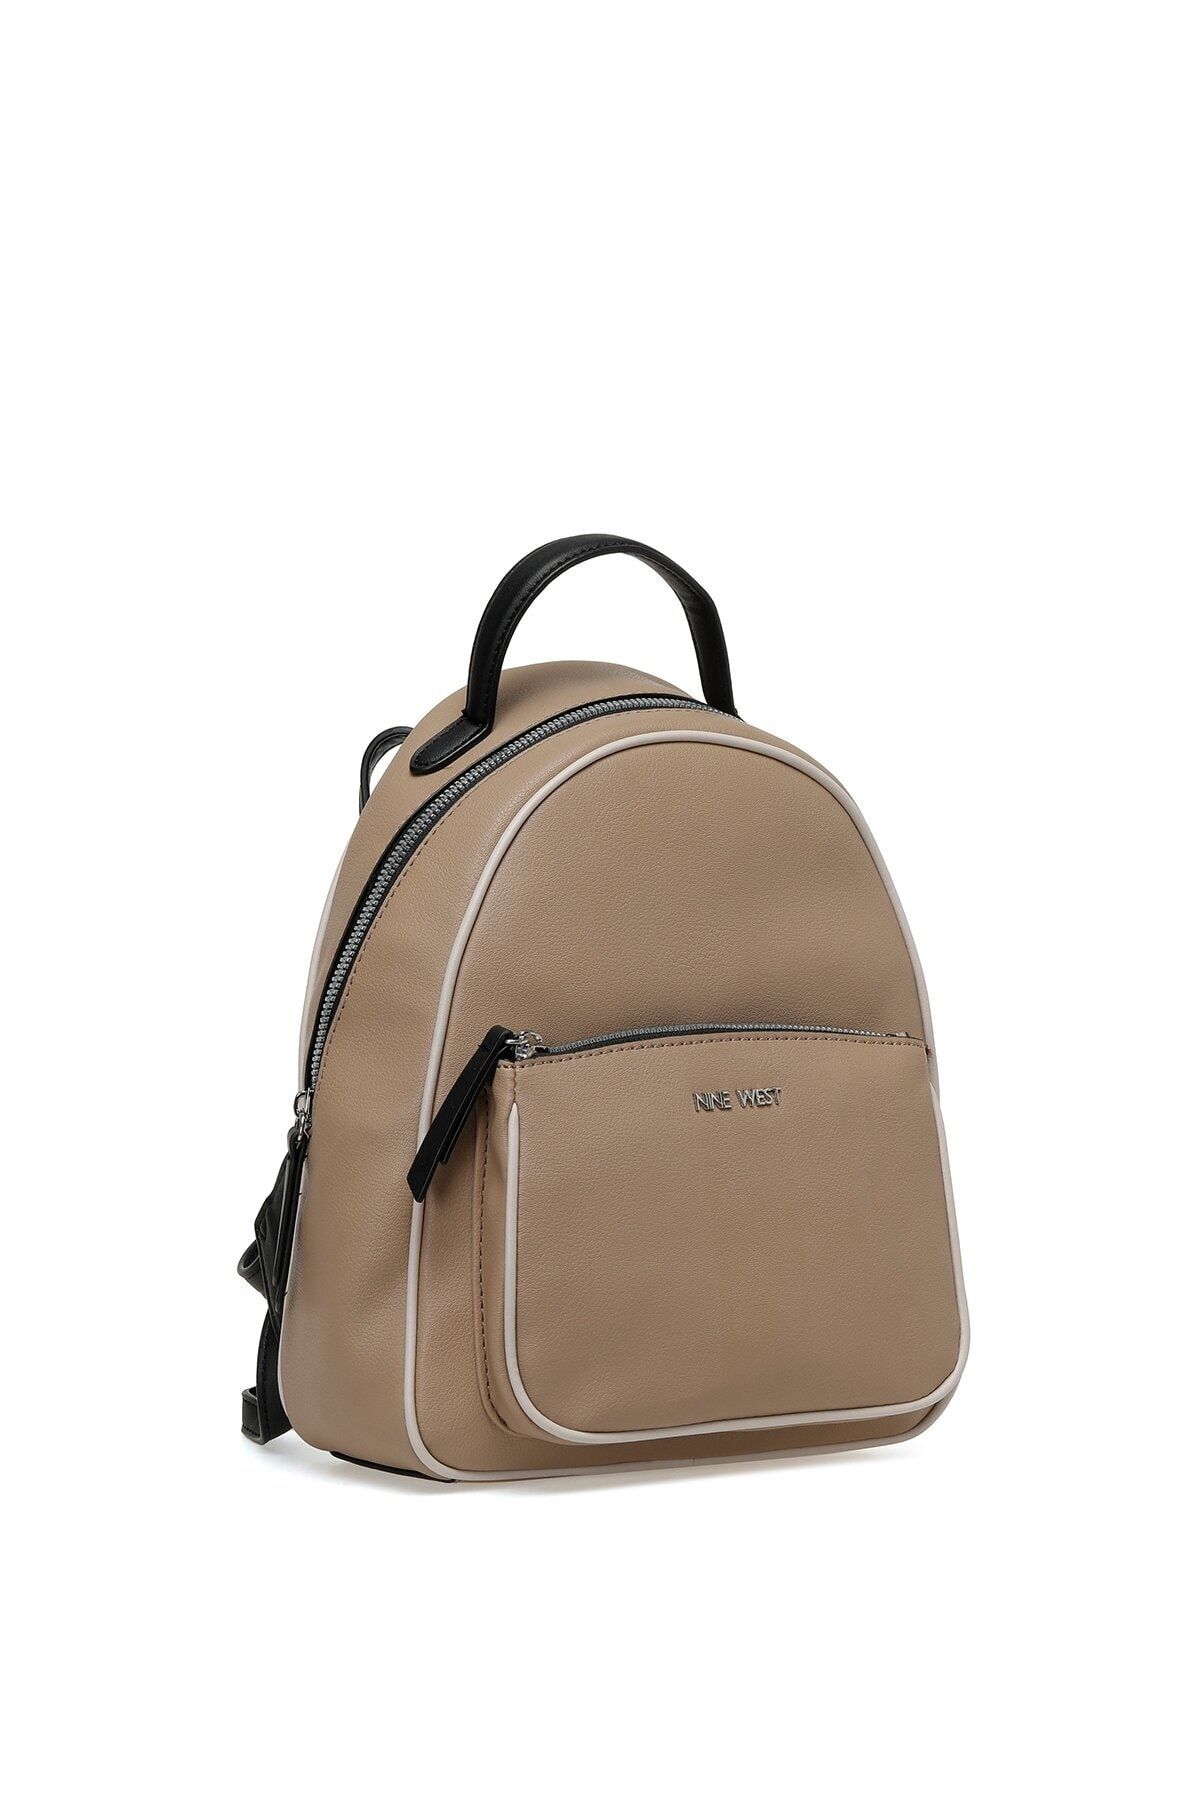 Nine West Got Your Back Backpack | Backpacks | Clothing & Accessories |  Shop The Exchange